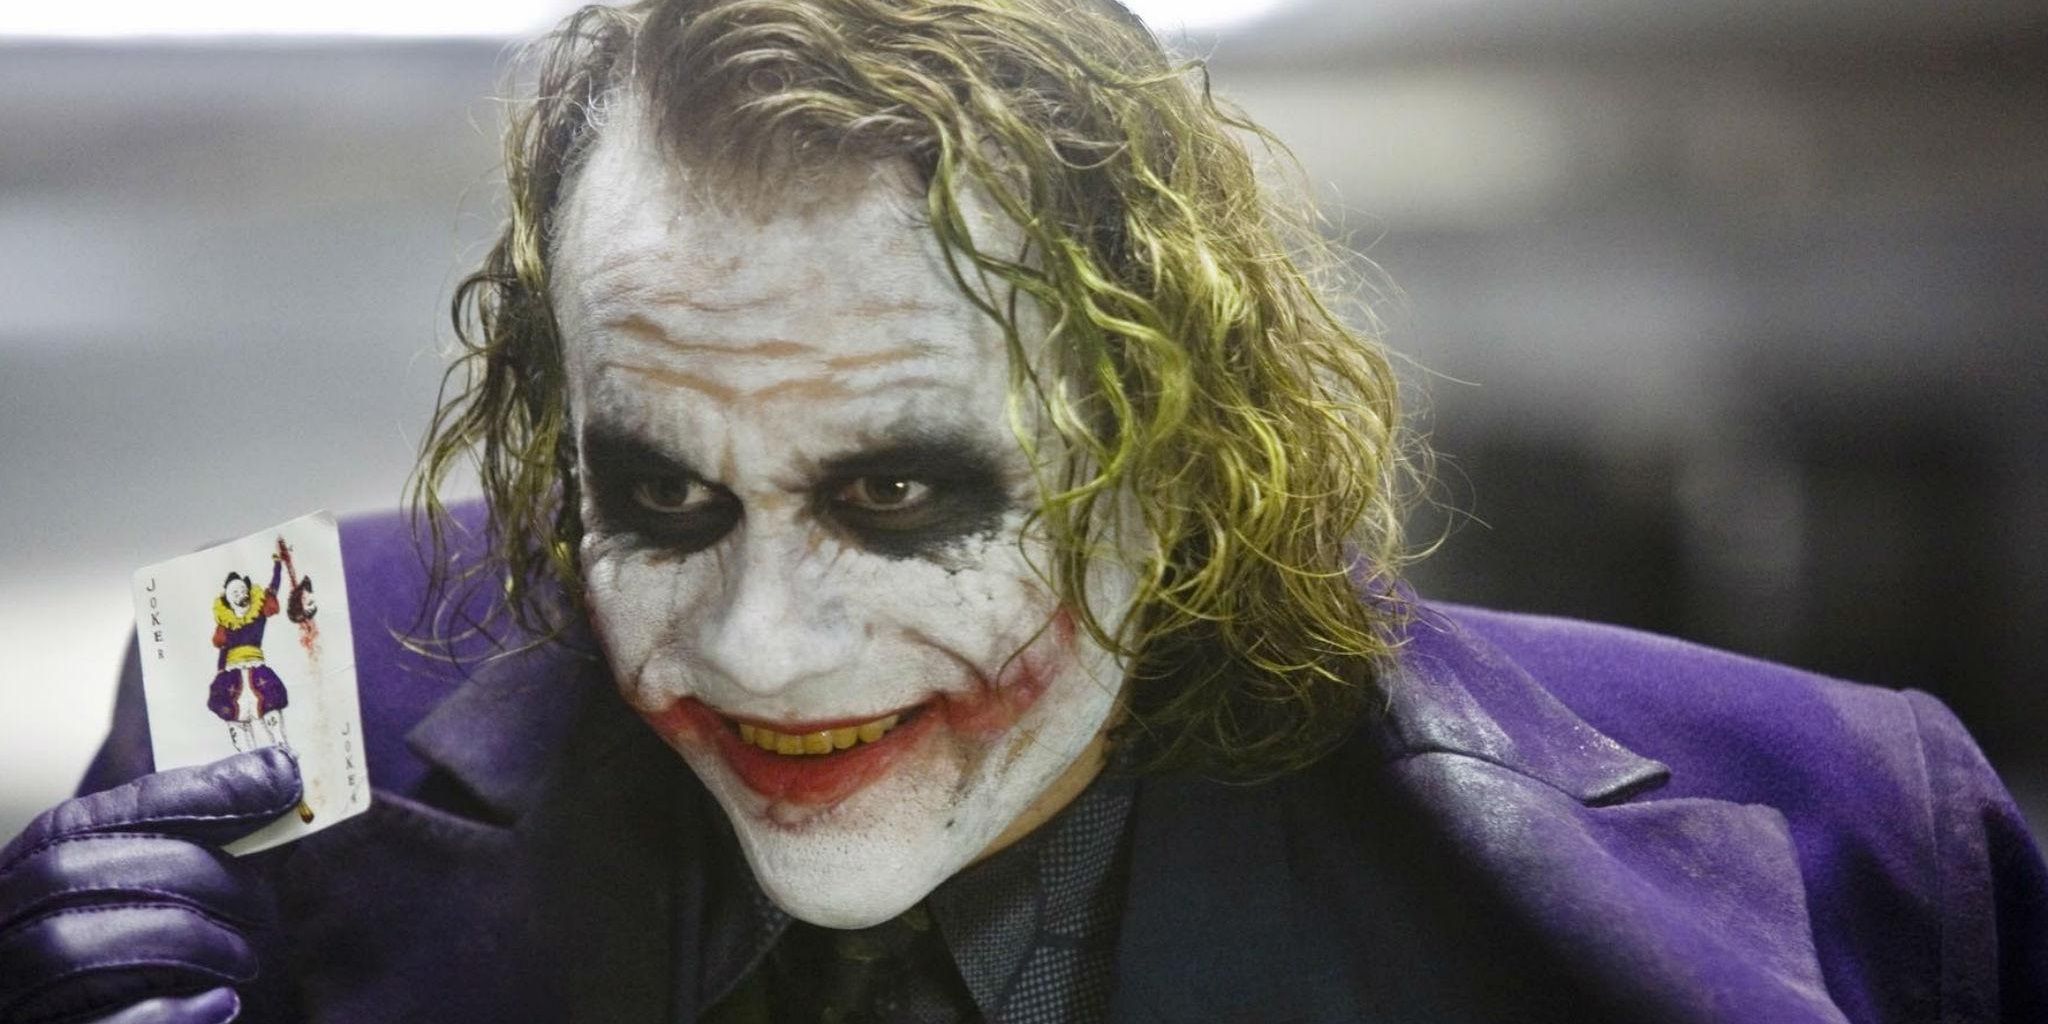 Heath Ledger as the Joker holding a playing card